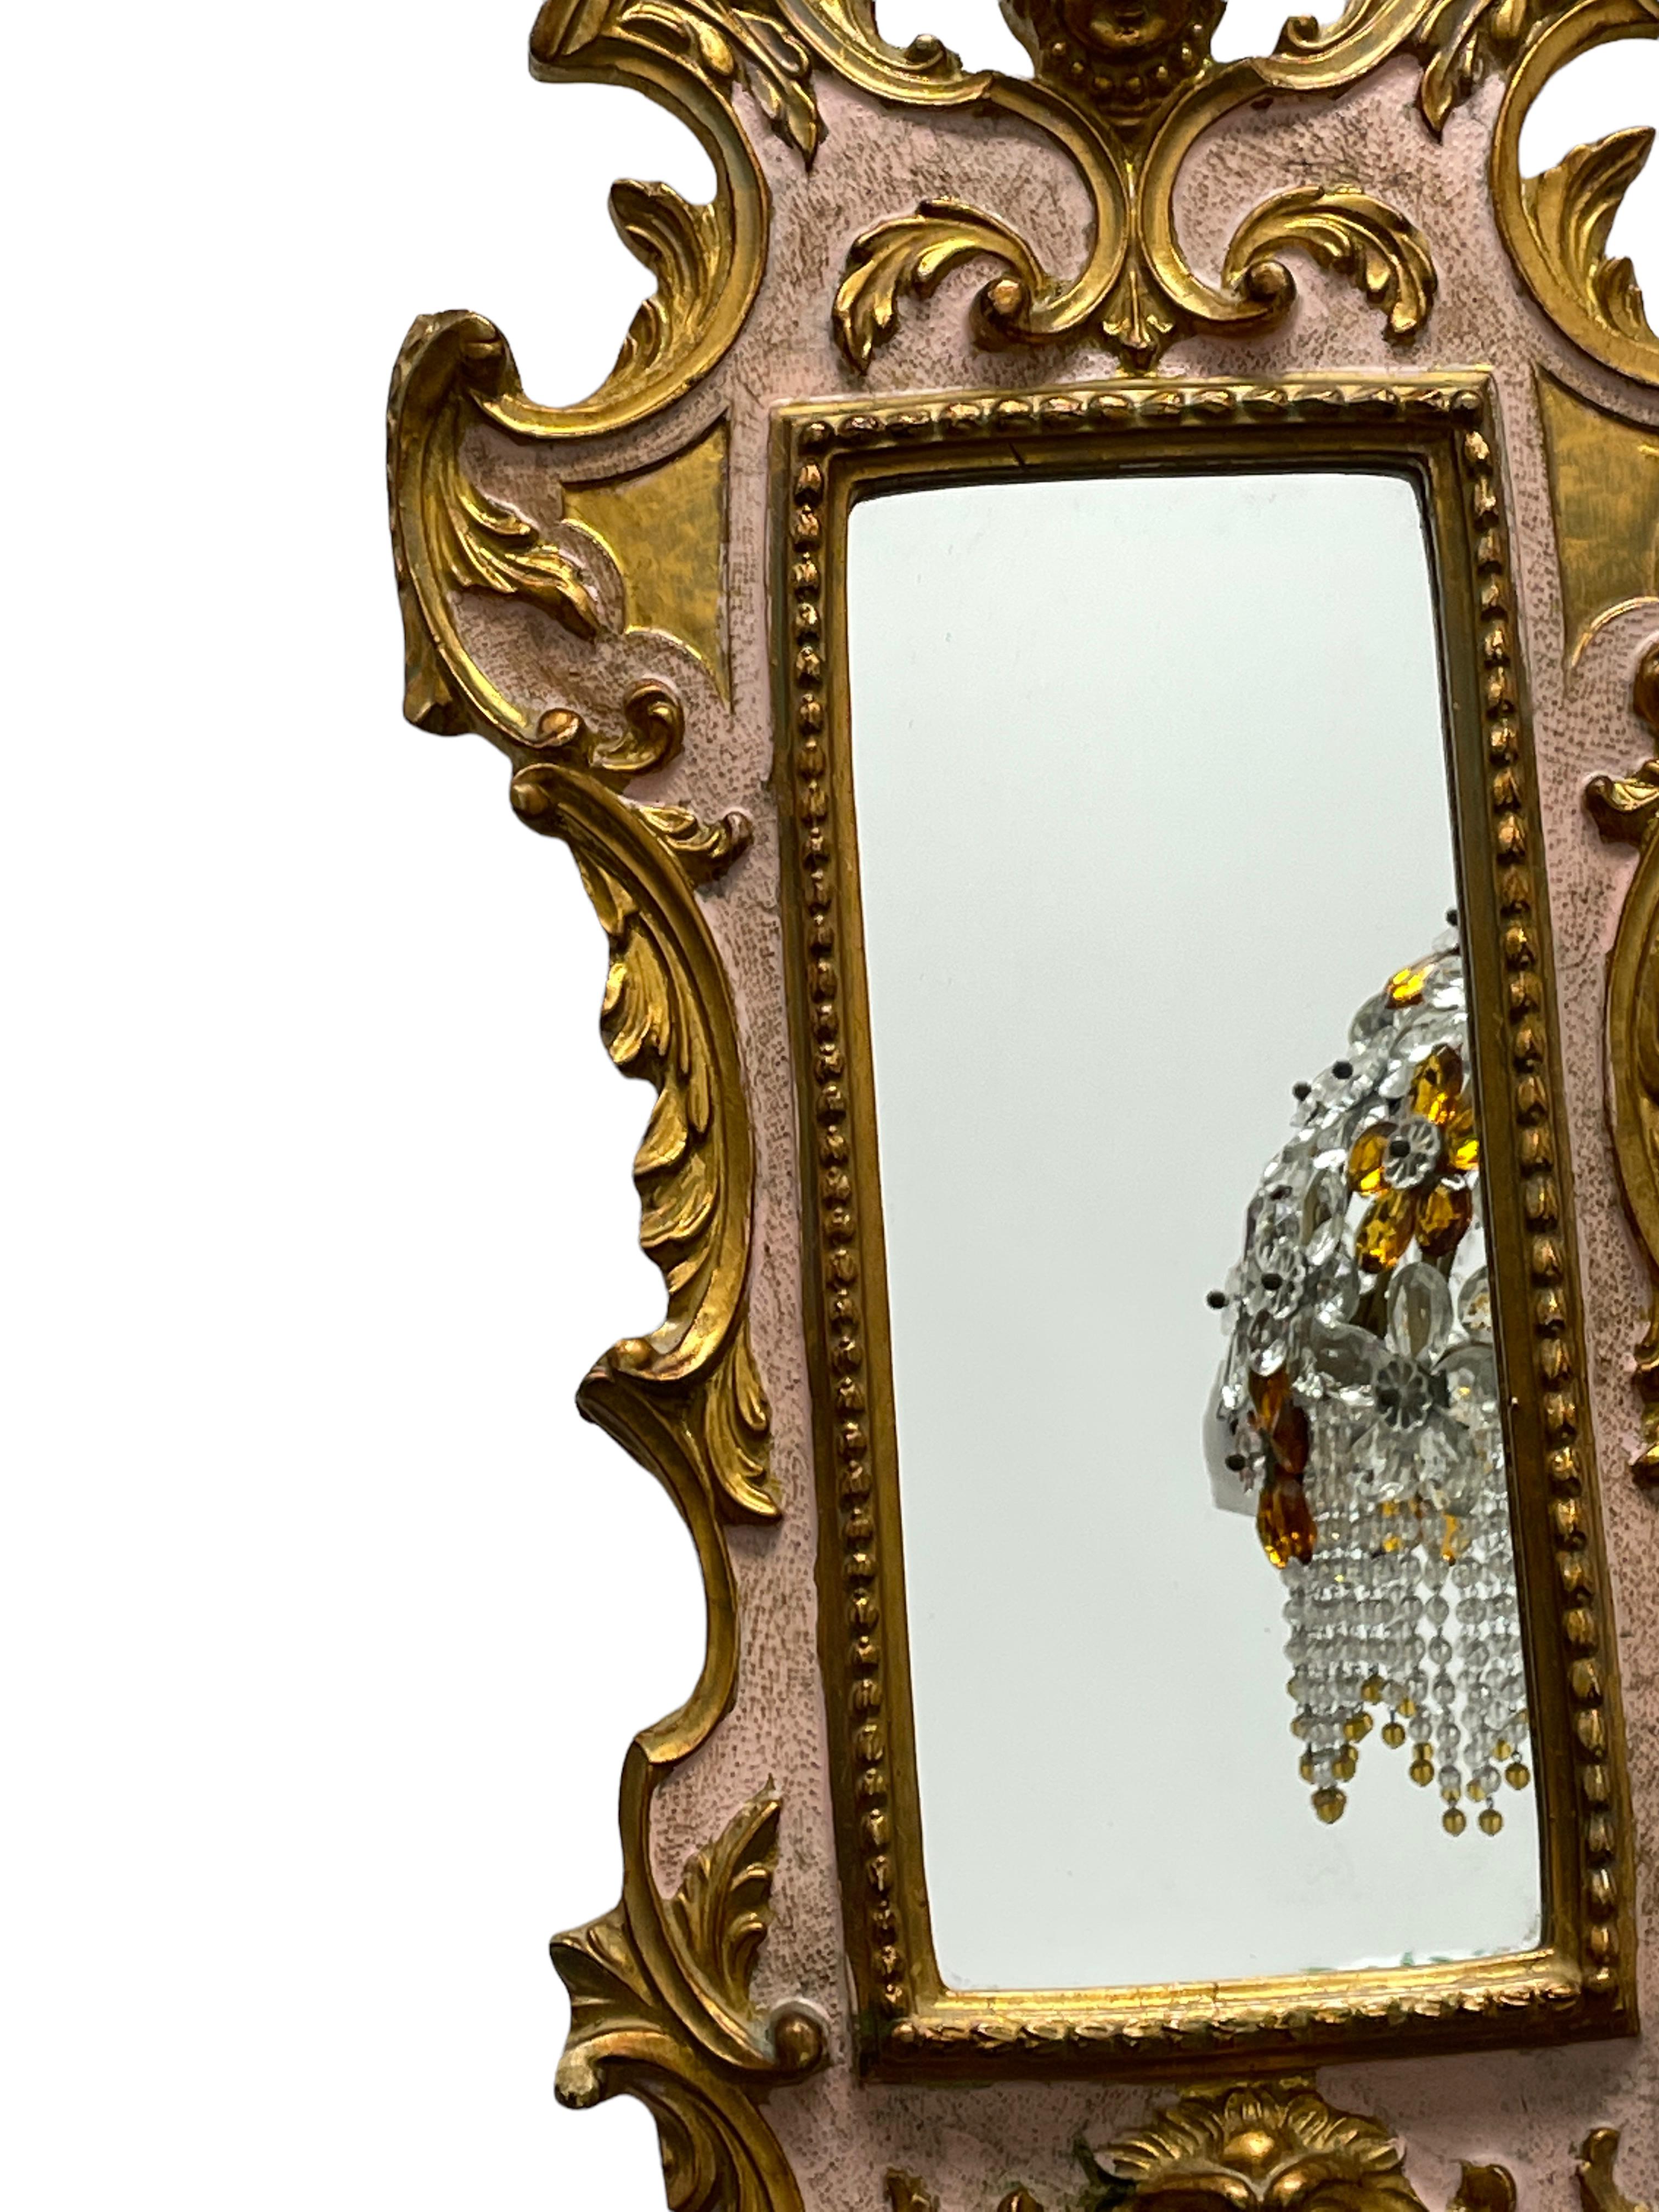 German Beautiful Stunning Ornate Tole Toleware Gilded Frame Mirror, Italy Antique 1900s For Sale